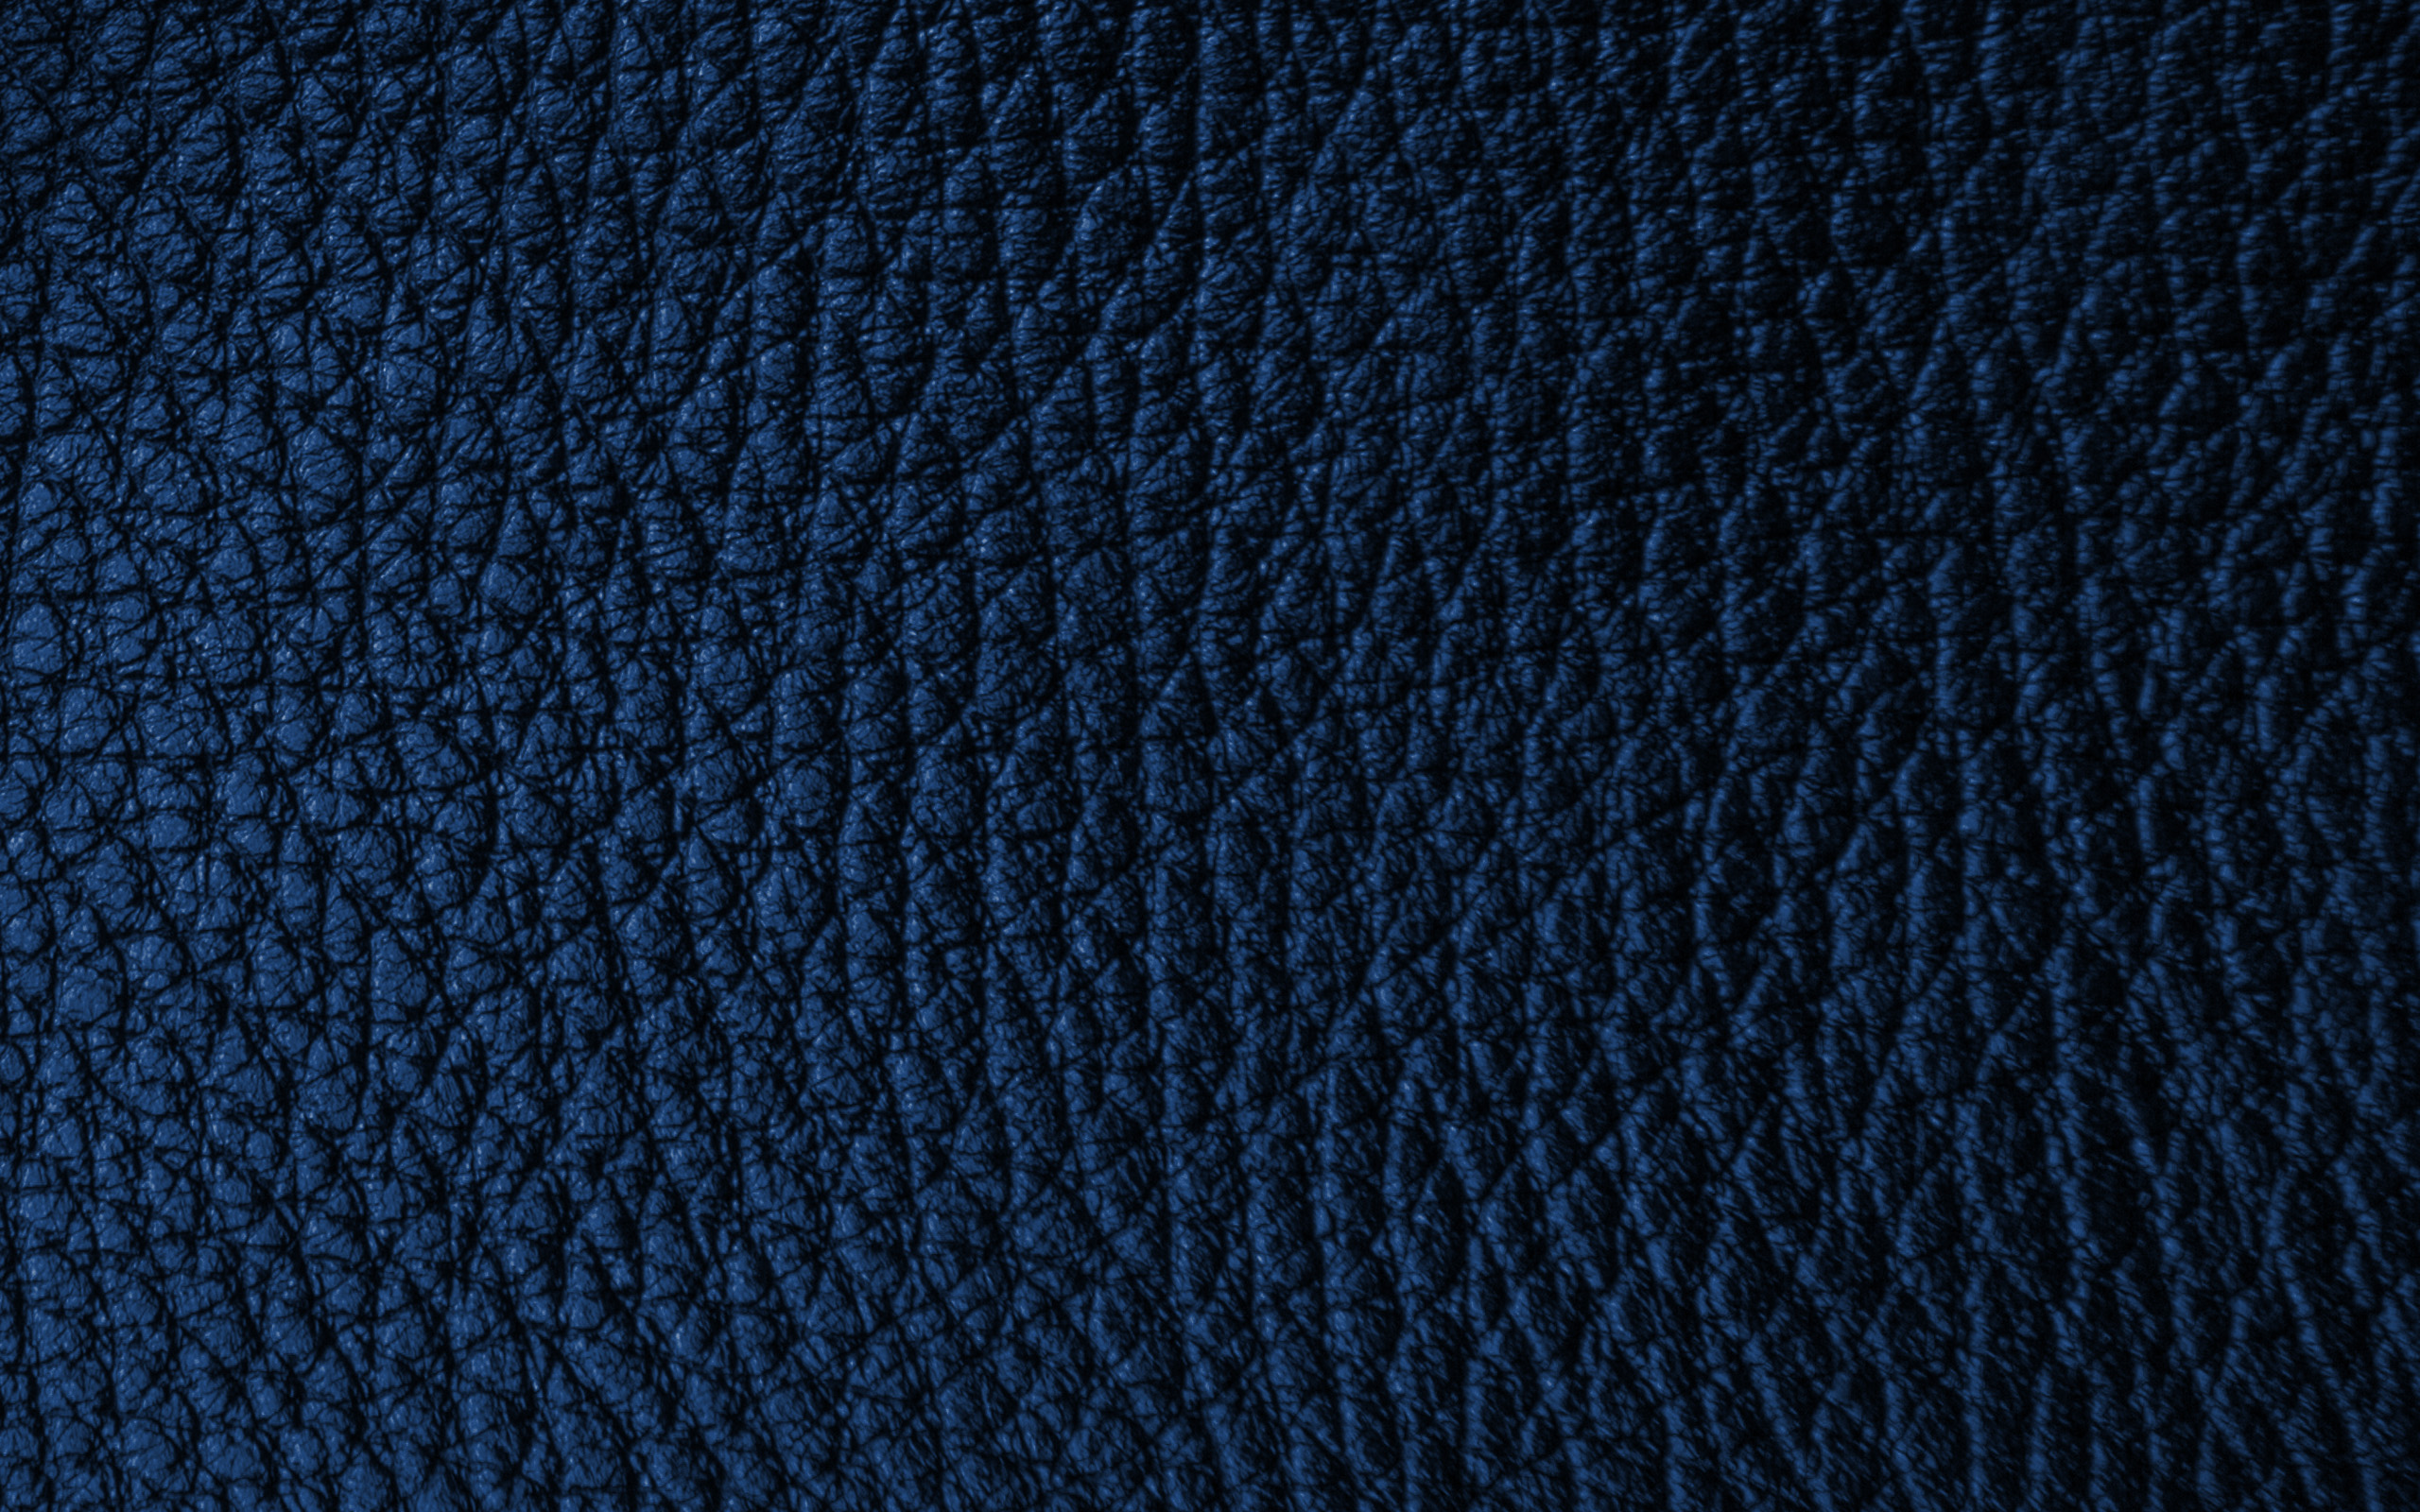 Download wallpaper blue leather texture, blue leather background, blue texture, fabric for desktop with resolution 2560x1600. High Quality HD picture wallpaper